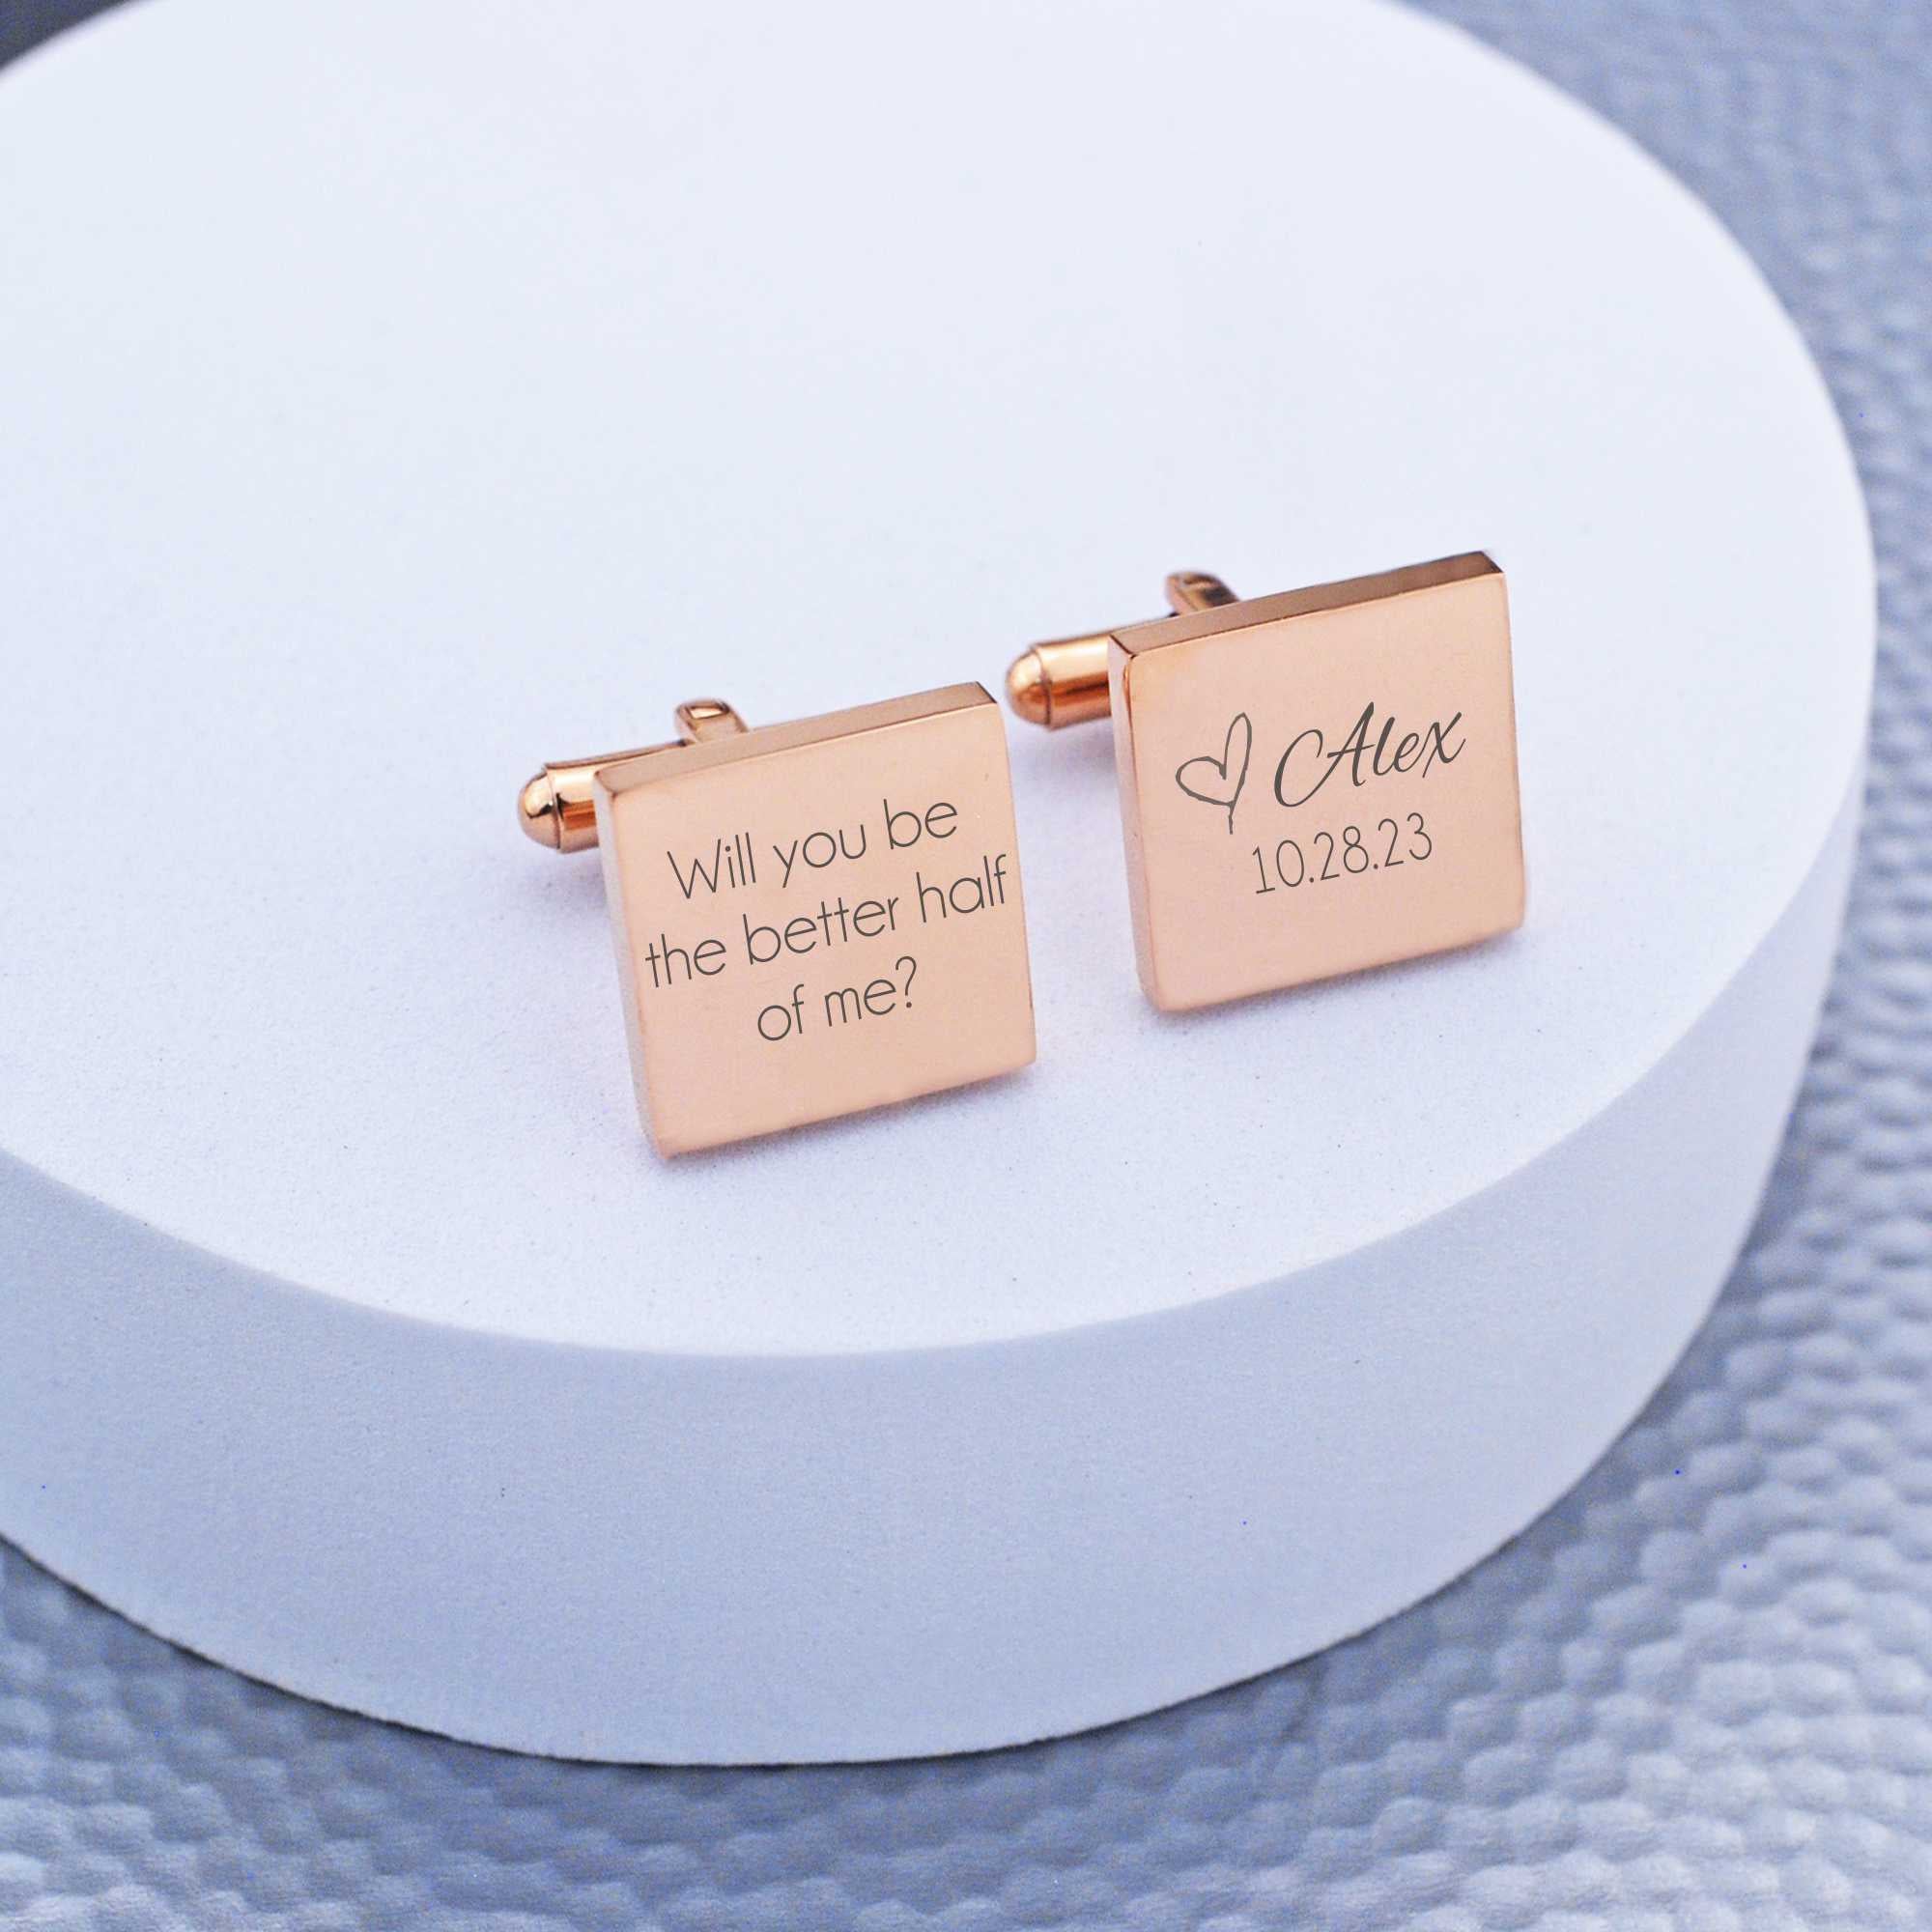 Cufflinks for the Groom - Will You Be The Better Half of Me?